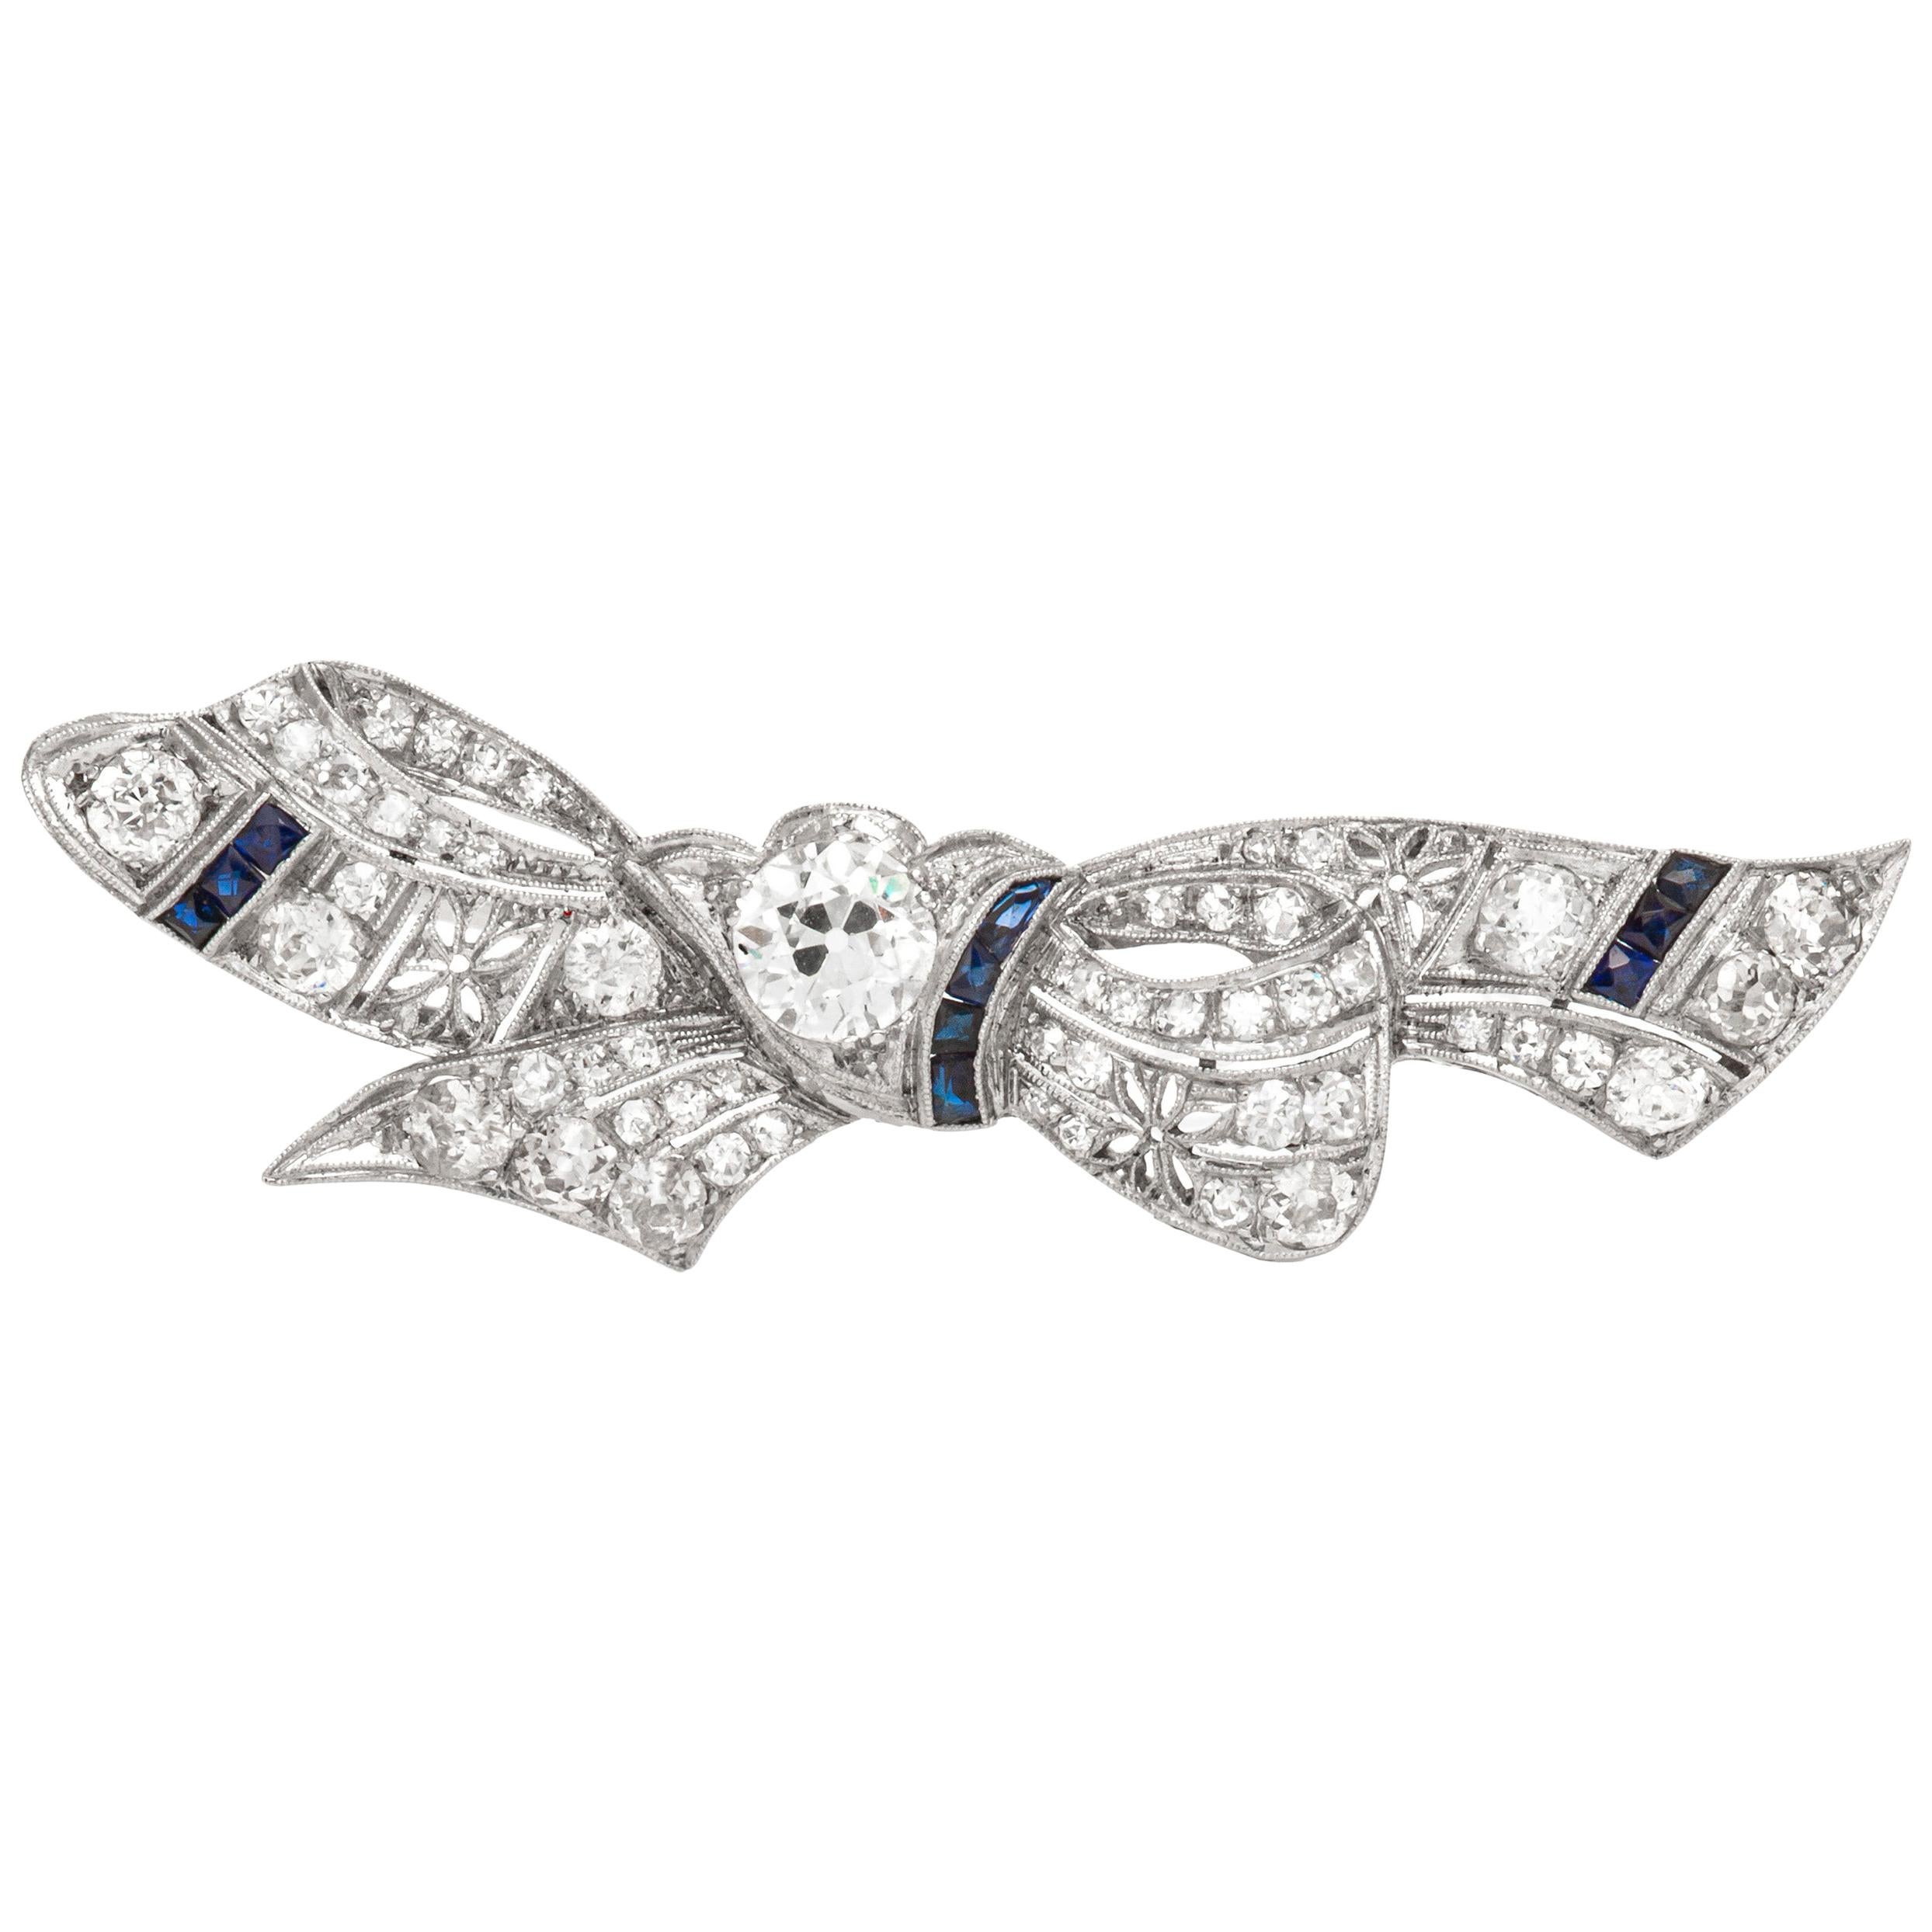 Bow Tie Platinum with Diamonds and Synthetic Sapphire Brooch